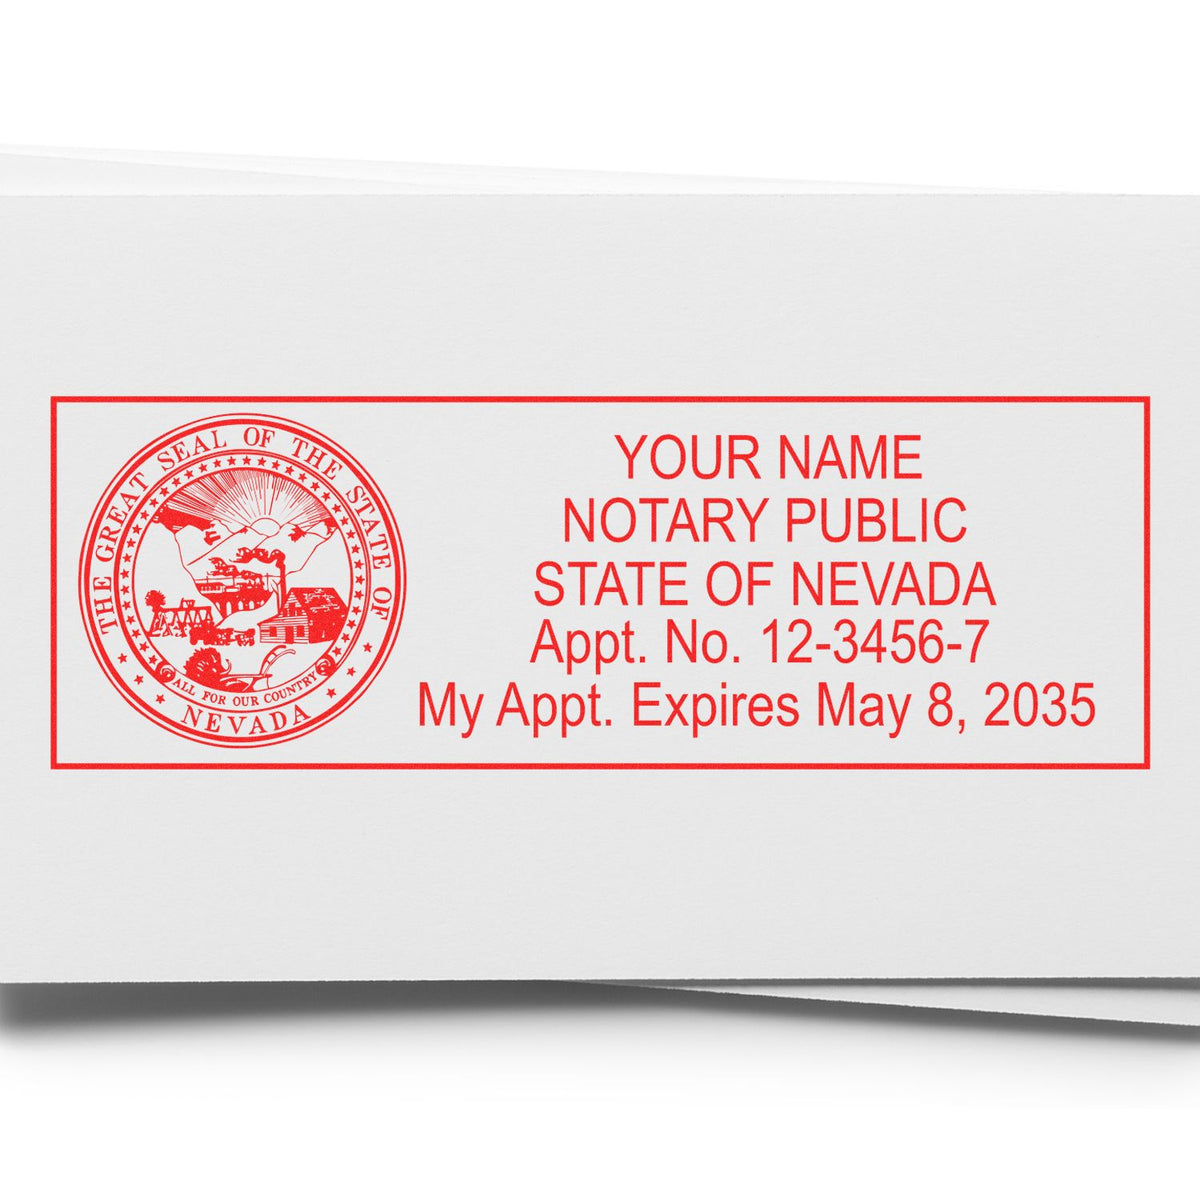 An alternative view of the MaxLight Premium Pre-Inked Nevada State Seal Notarial Stamp stamped on a sheet of paper showing the image in use